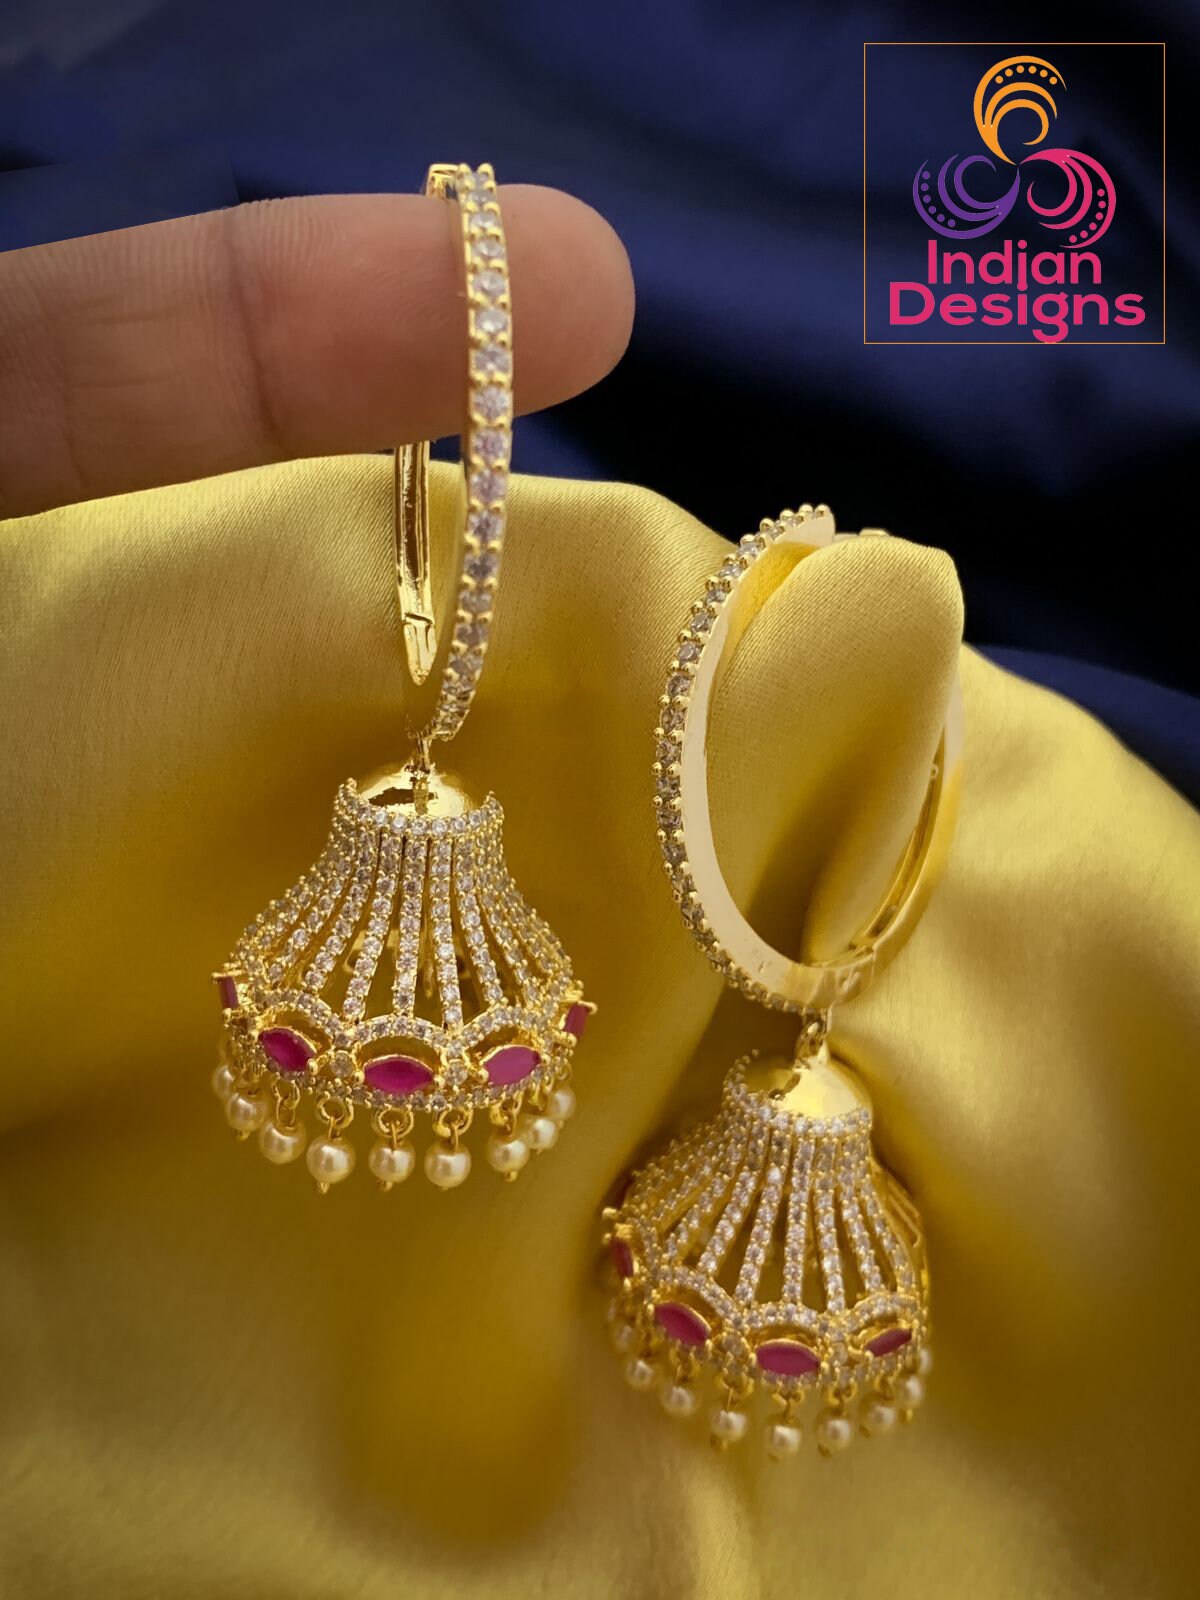 India Earrings Amrapali Jewelry Temple Studs South India Temple Jewellery  Set India Stud Earrings 22k Gold Plated Earring India Gold Jewelry - Etsy | Big  earrings gold, Big stud earrings, Gold jewelry prom